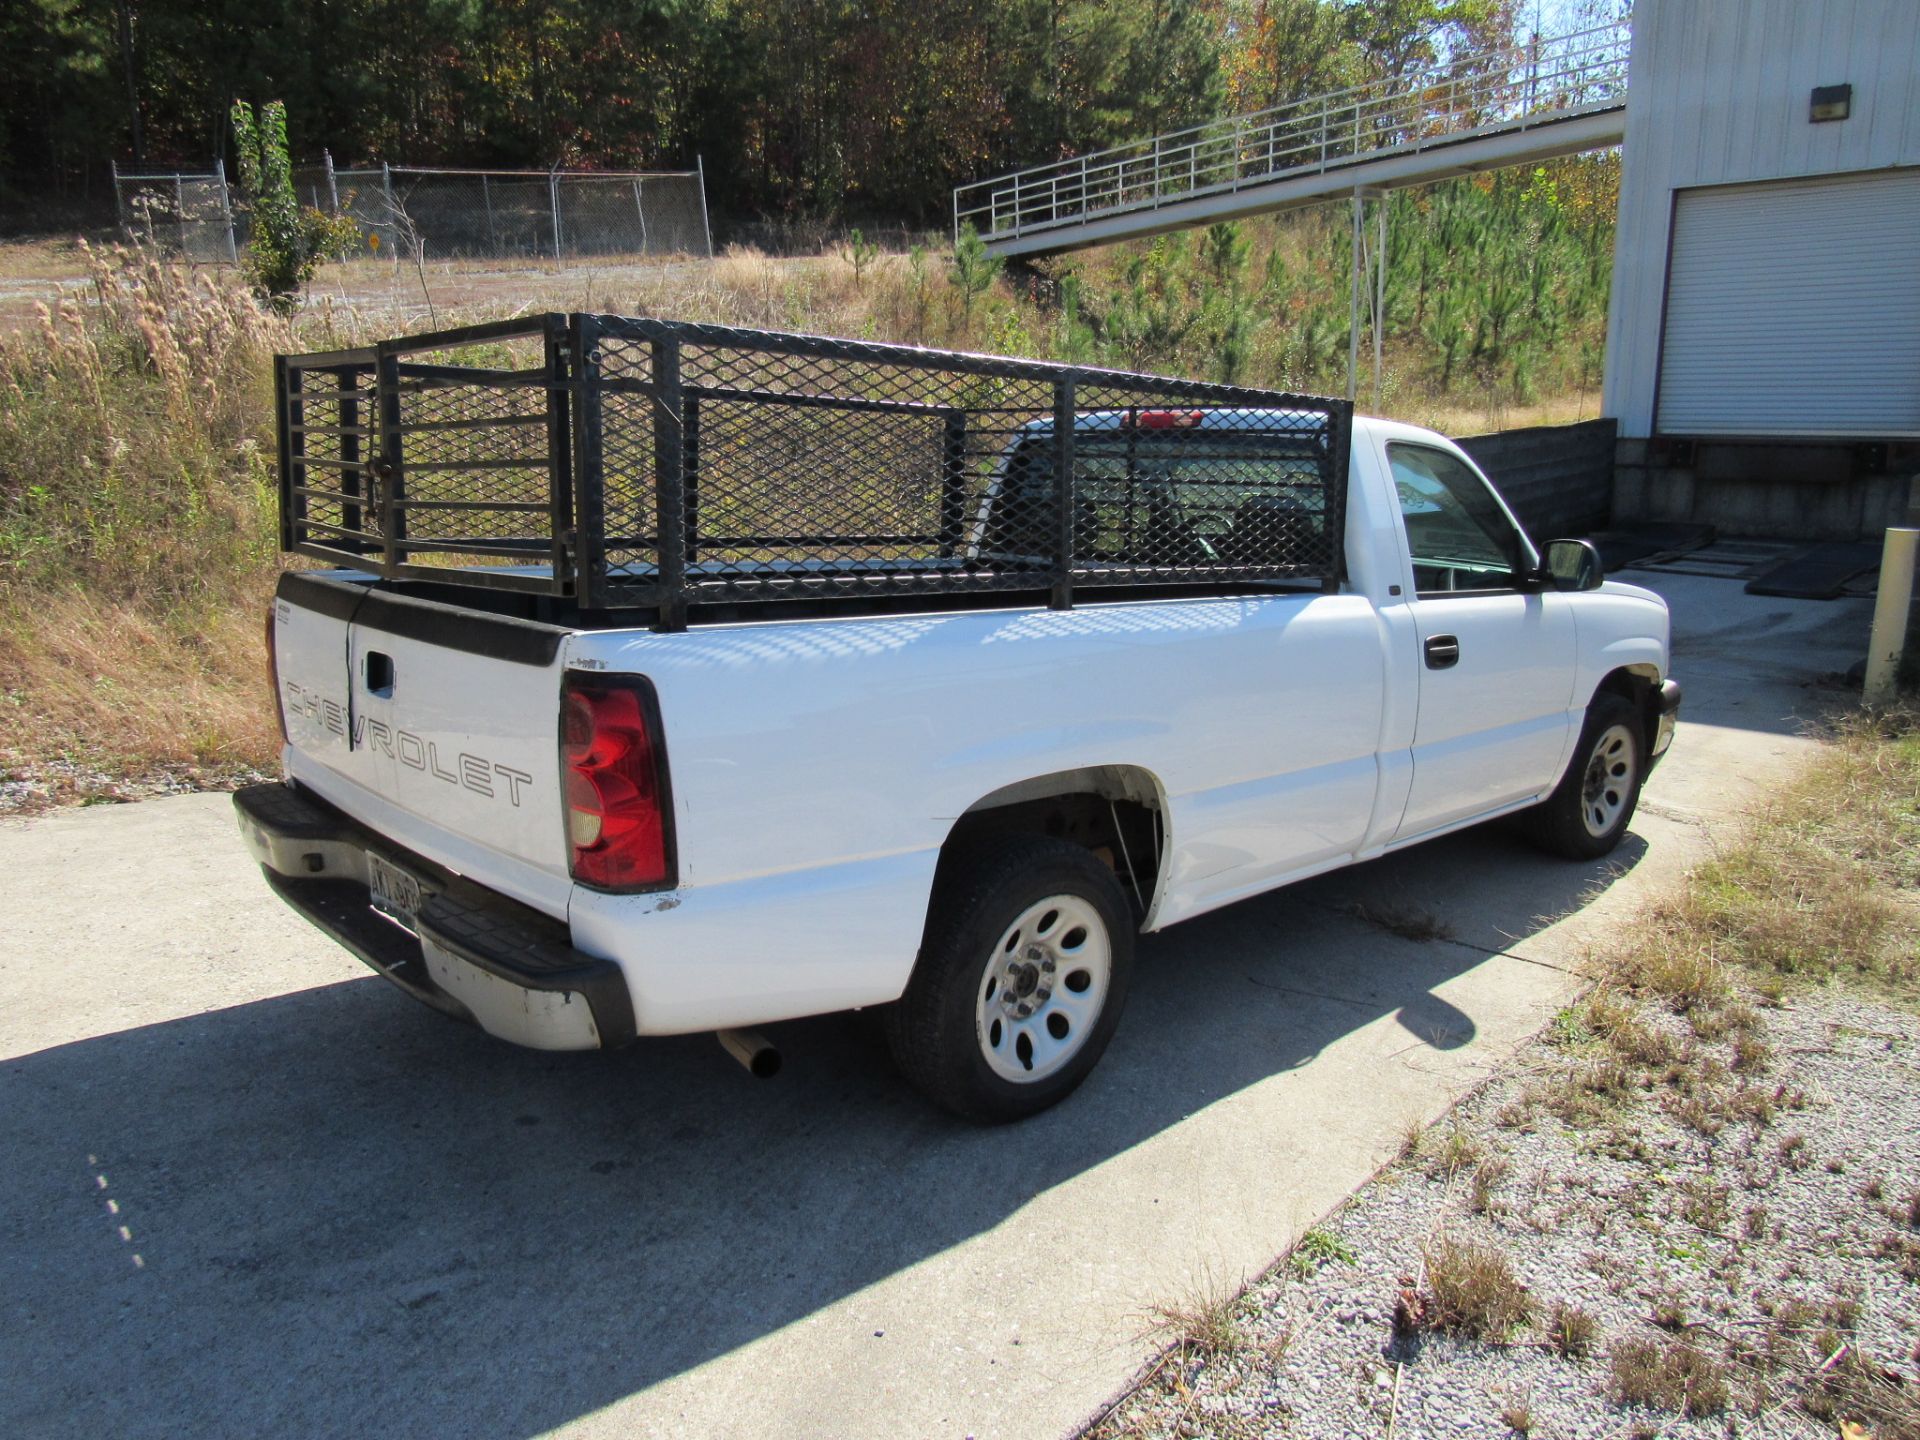 Chevrolet Silverado C150 Pick Up Truck with Work Safety Cage in Bed, vin:1GCEC14X152311849, mfg. - Image 6 of 7